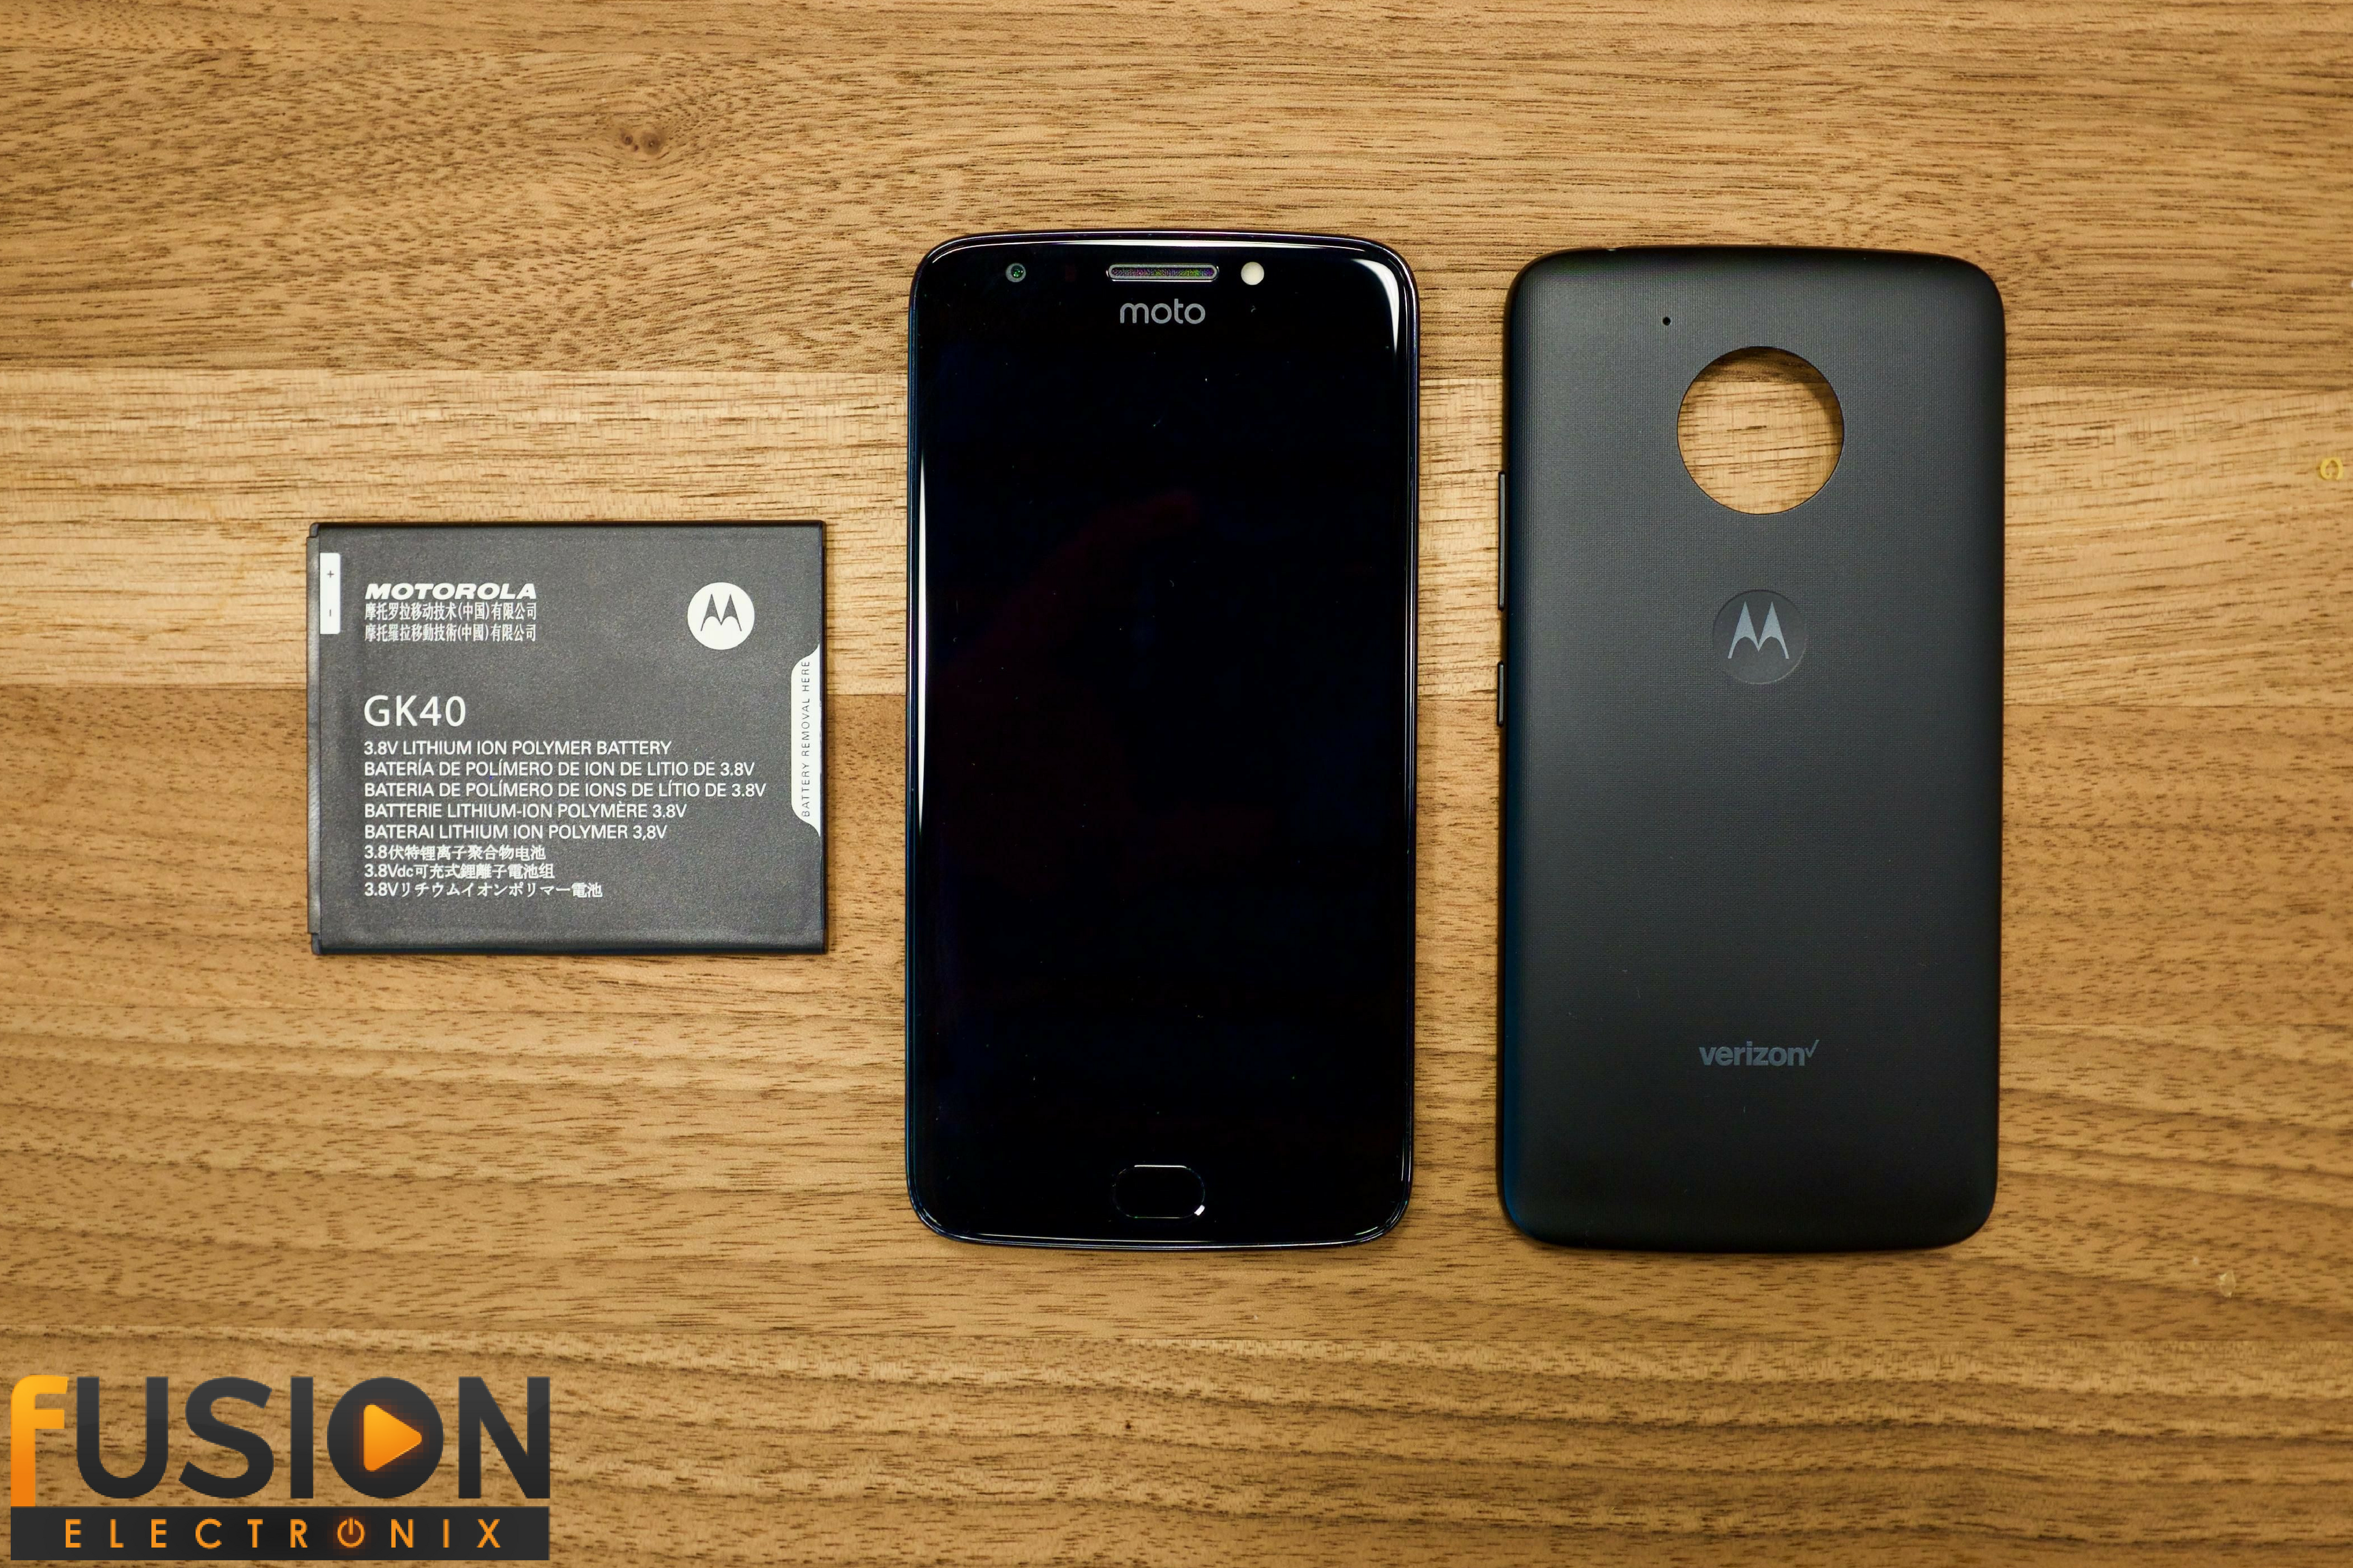 The Moto E4: Enjoy Premium Functionality at an Affordable Price